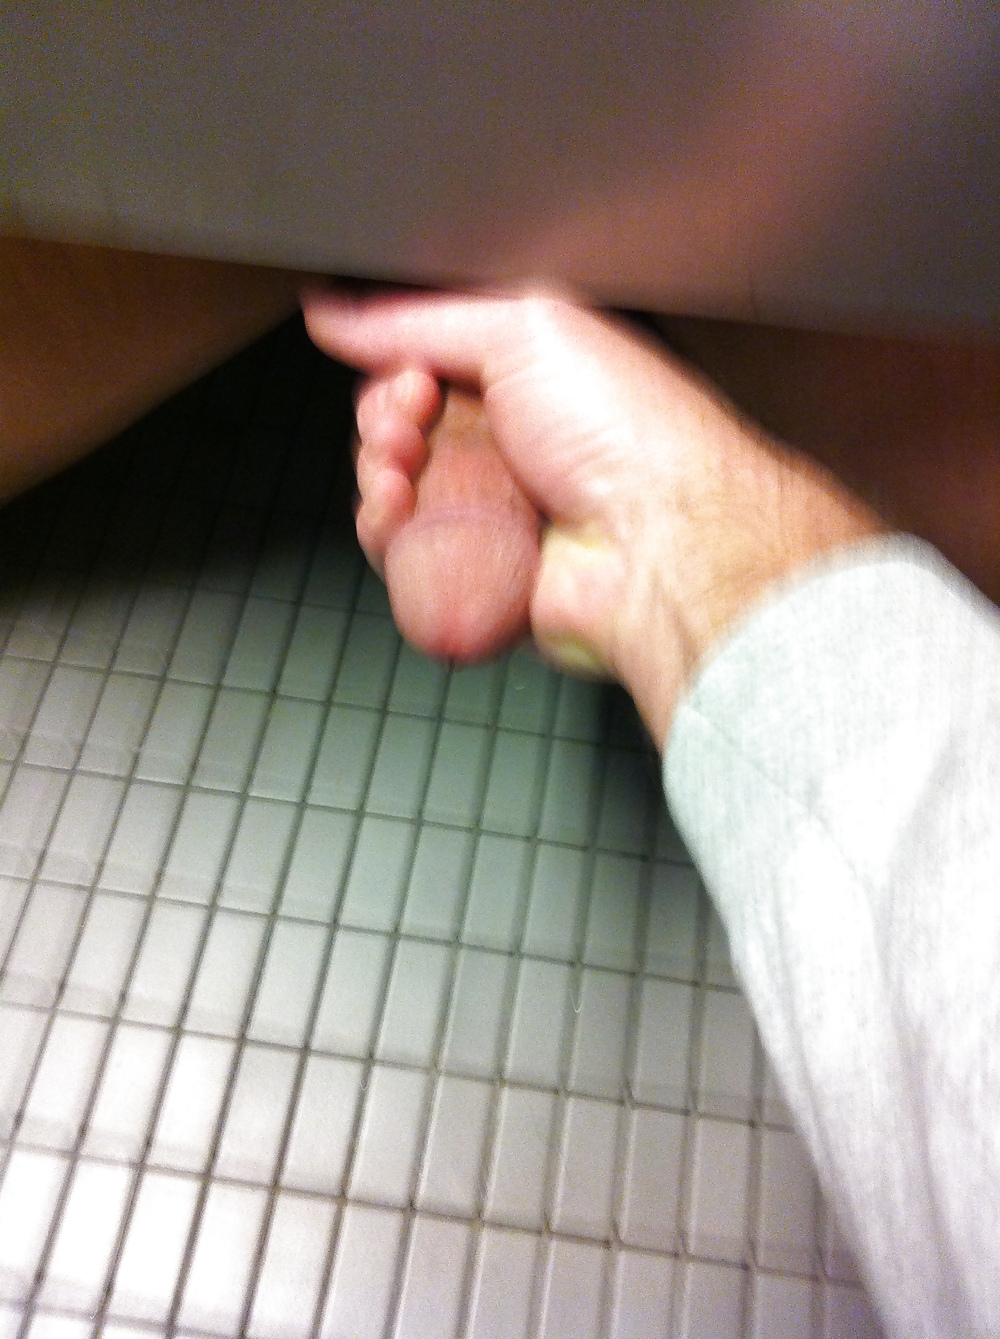 Under The Stall at the Mall